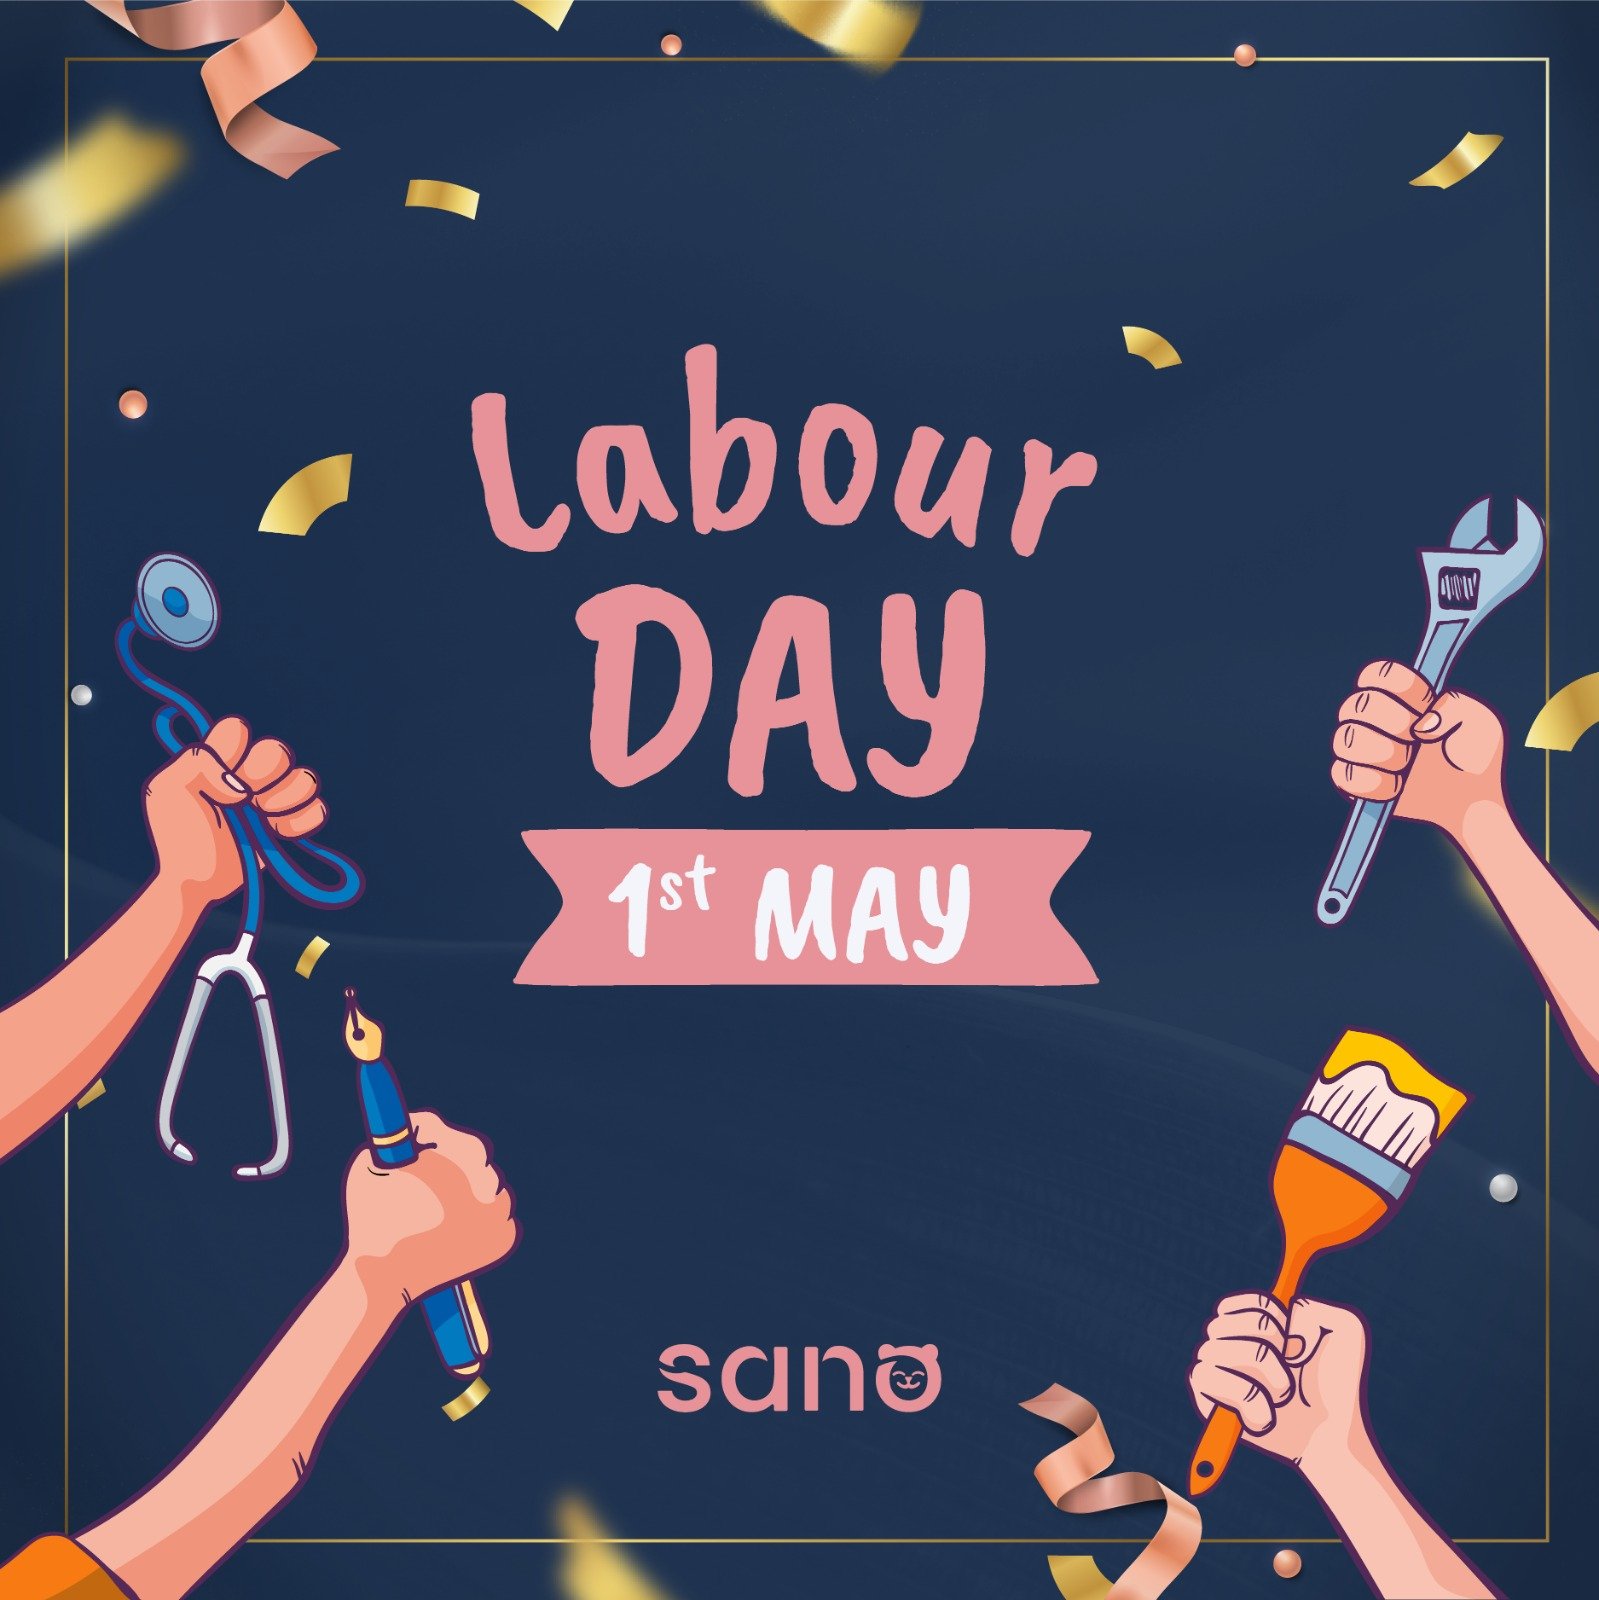 Happy Labour Day! 

Sending gratitude and appreciation to all the hardworking individuals who make a difference every day. Your hard work does not go unnoticed 🤗❤️